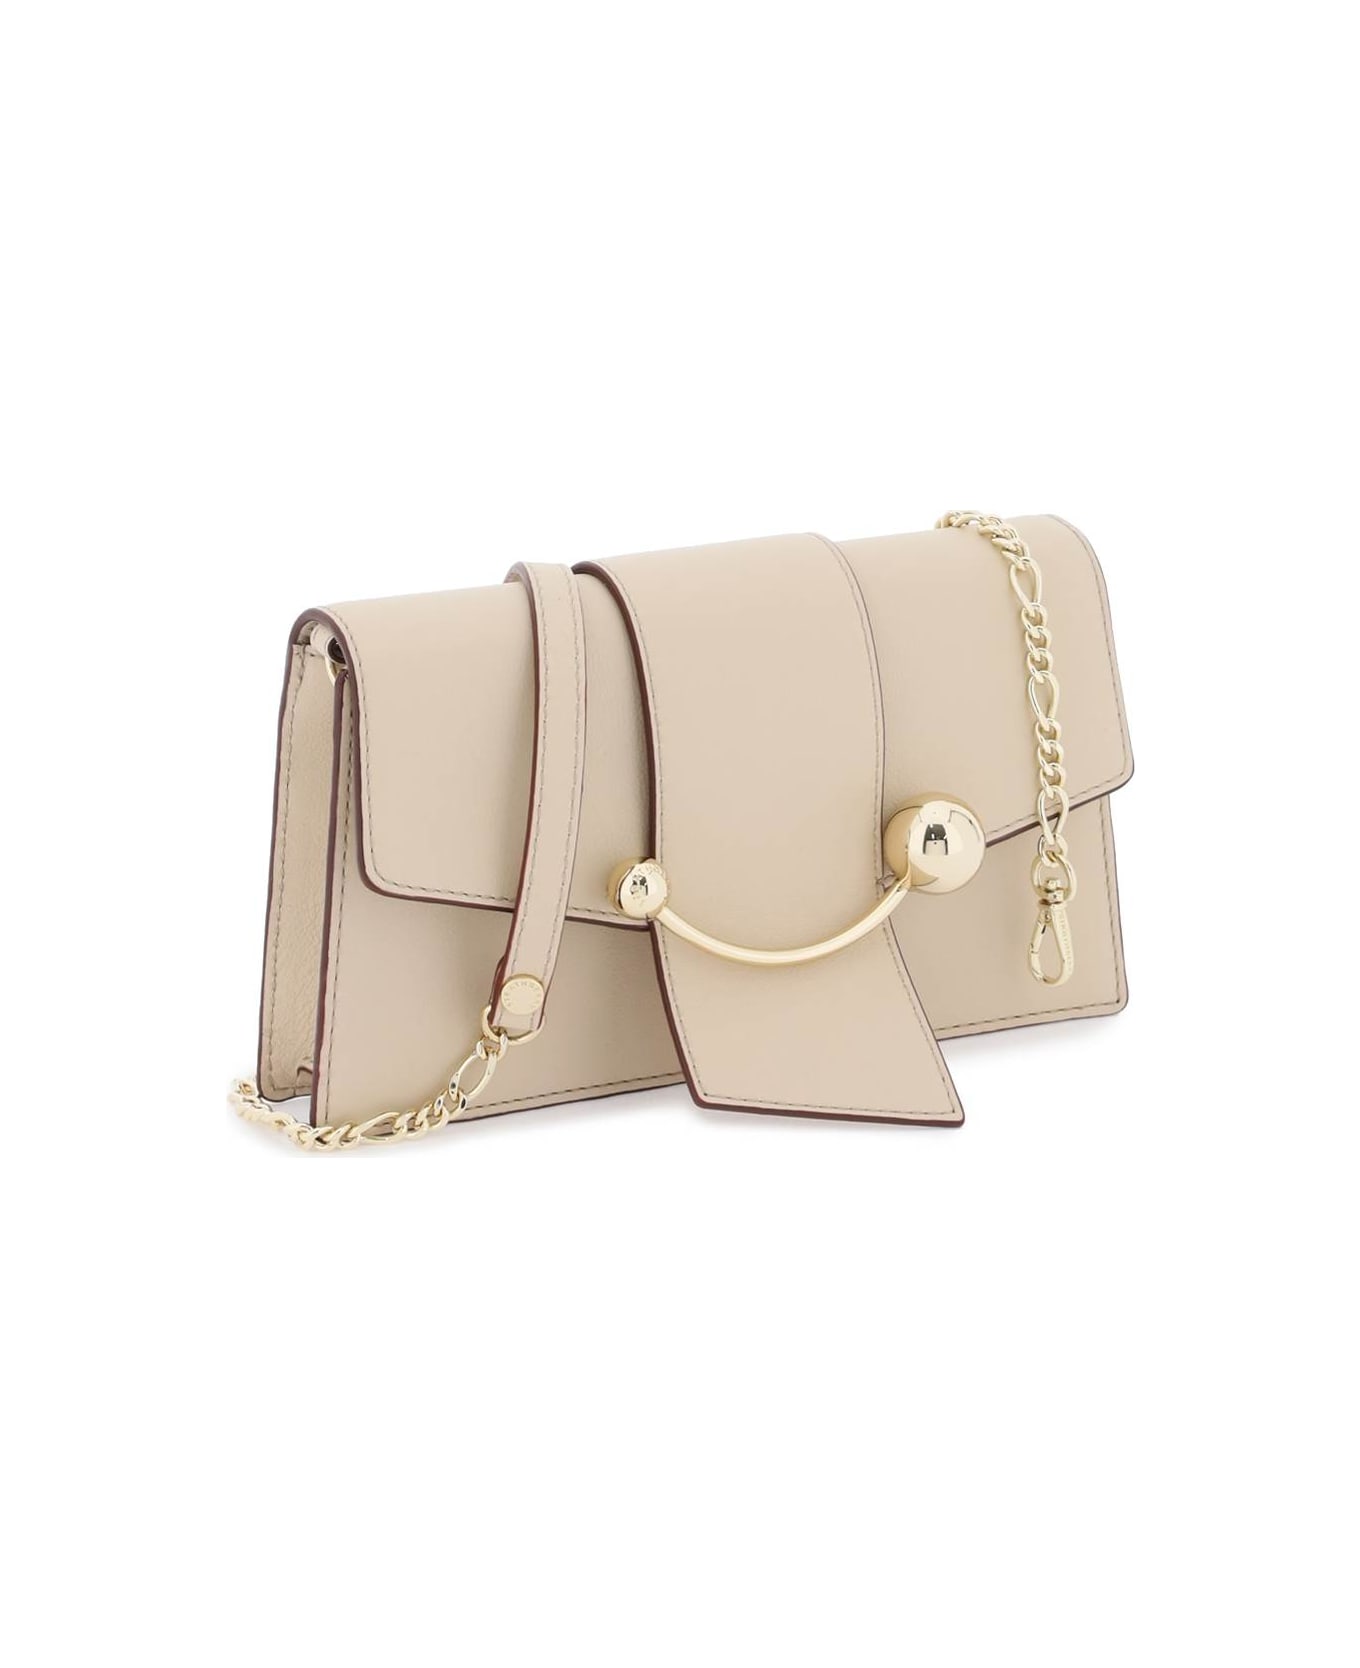 Strathberry Crescent On A Chain Crossbody Mini Bag - OAT (Beige)